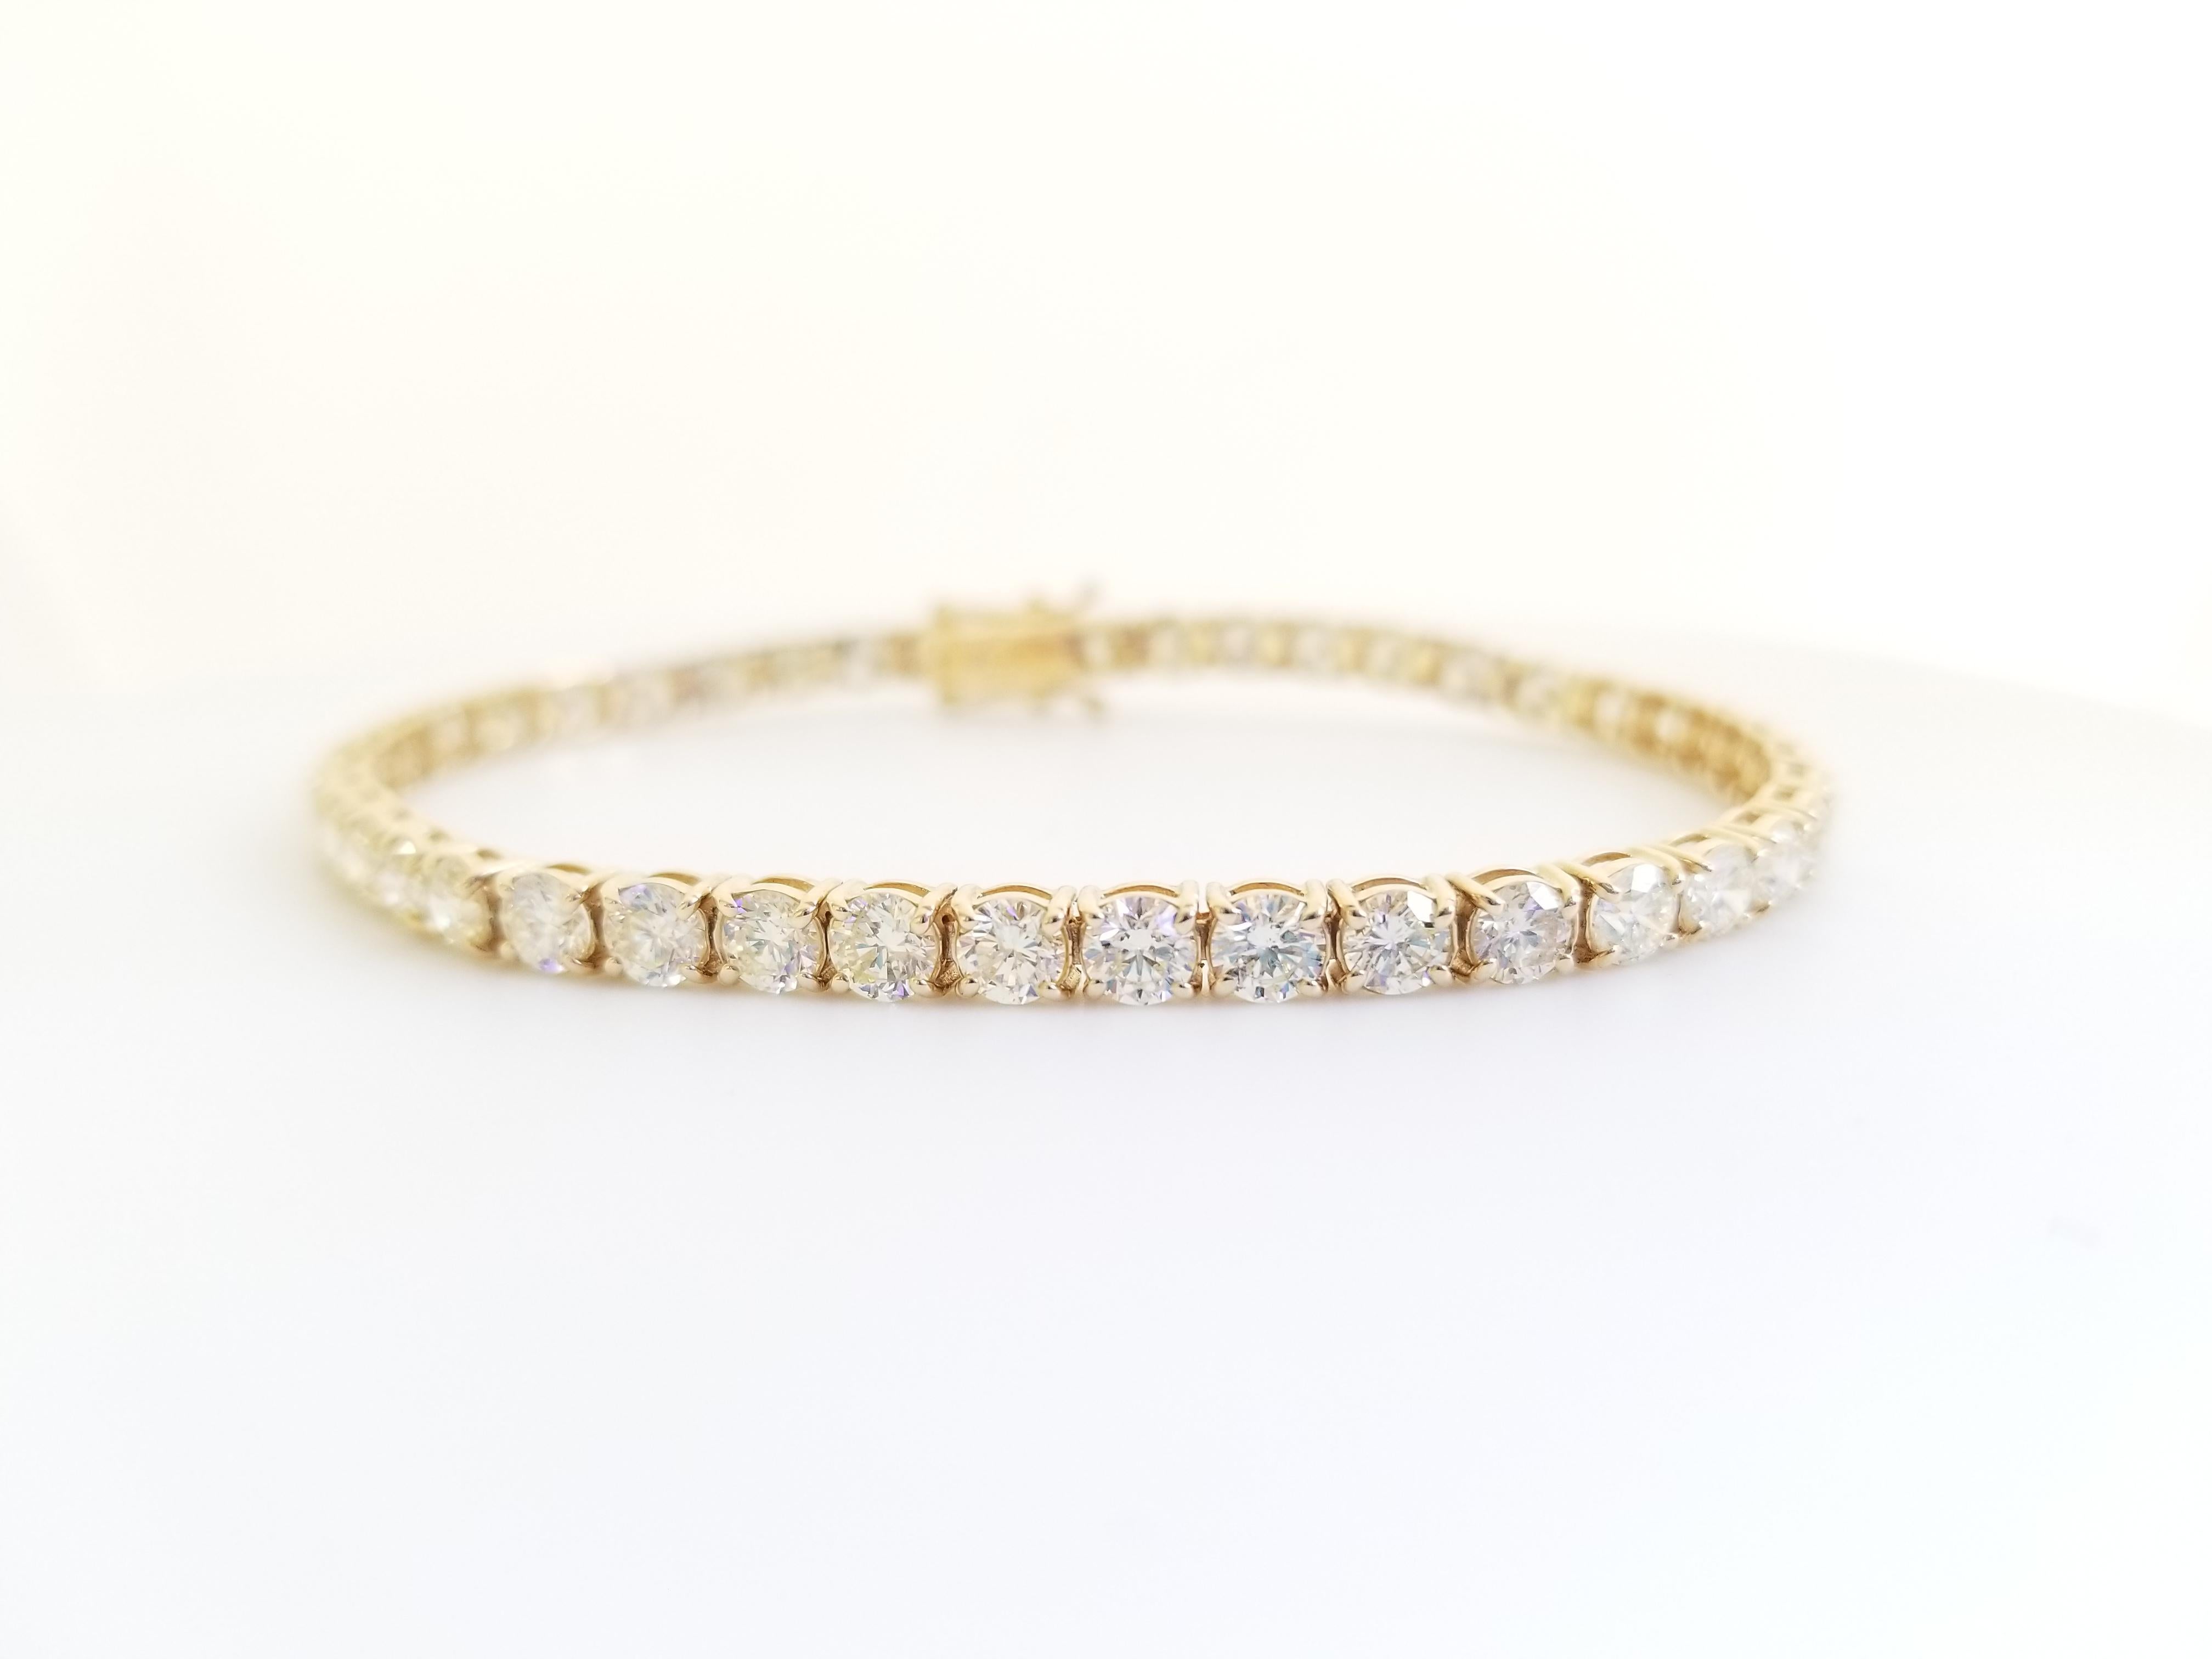 A quality tennis bracelet, containing 43 pcs of round-brilliant cut diamonds. set on 14k yellow gold. each stone is set in a classic four-prong style for maximum light brilliance. 7 inch length.